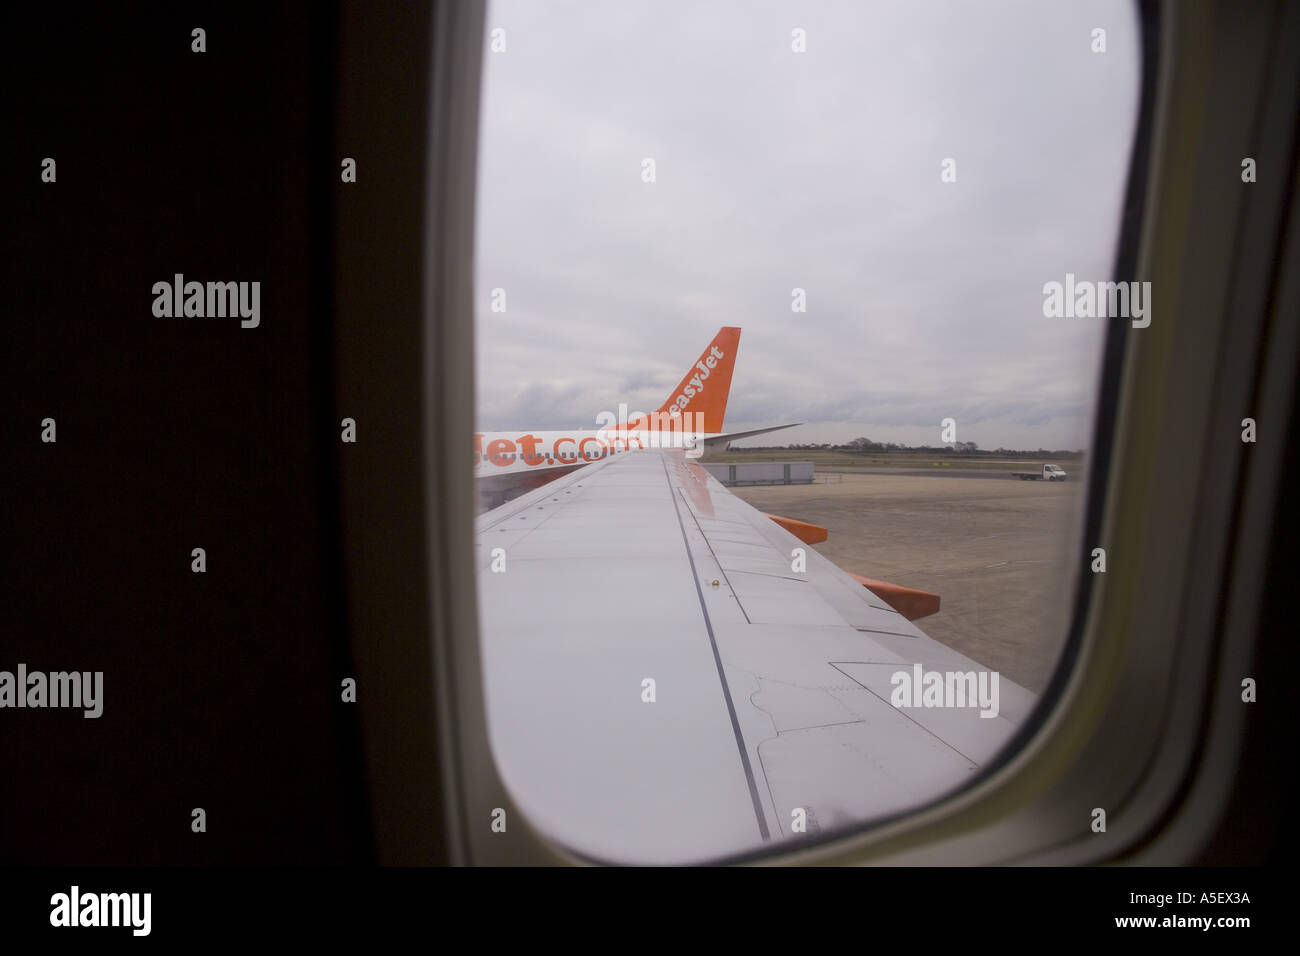 UK BRISTOL AIRPORT VIEW FROM EASYJET BOEING 737-700 SHOWING TAILFIN OF OTHER EASYJET AIRCRAFT Stock Photo